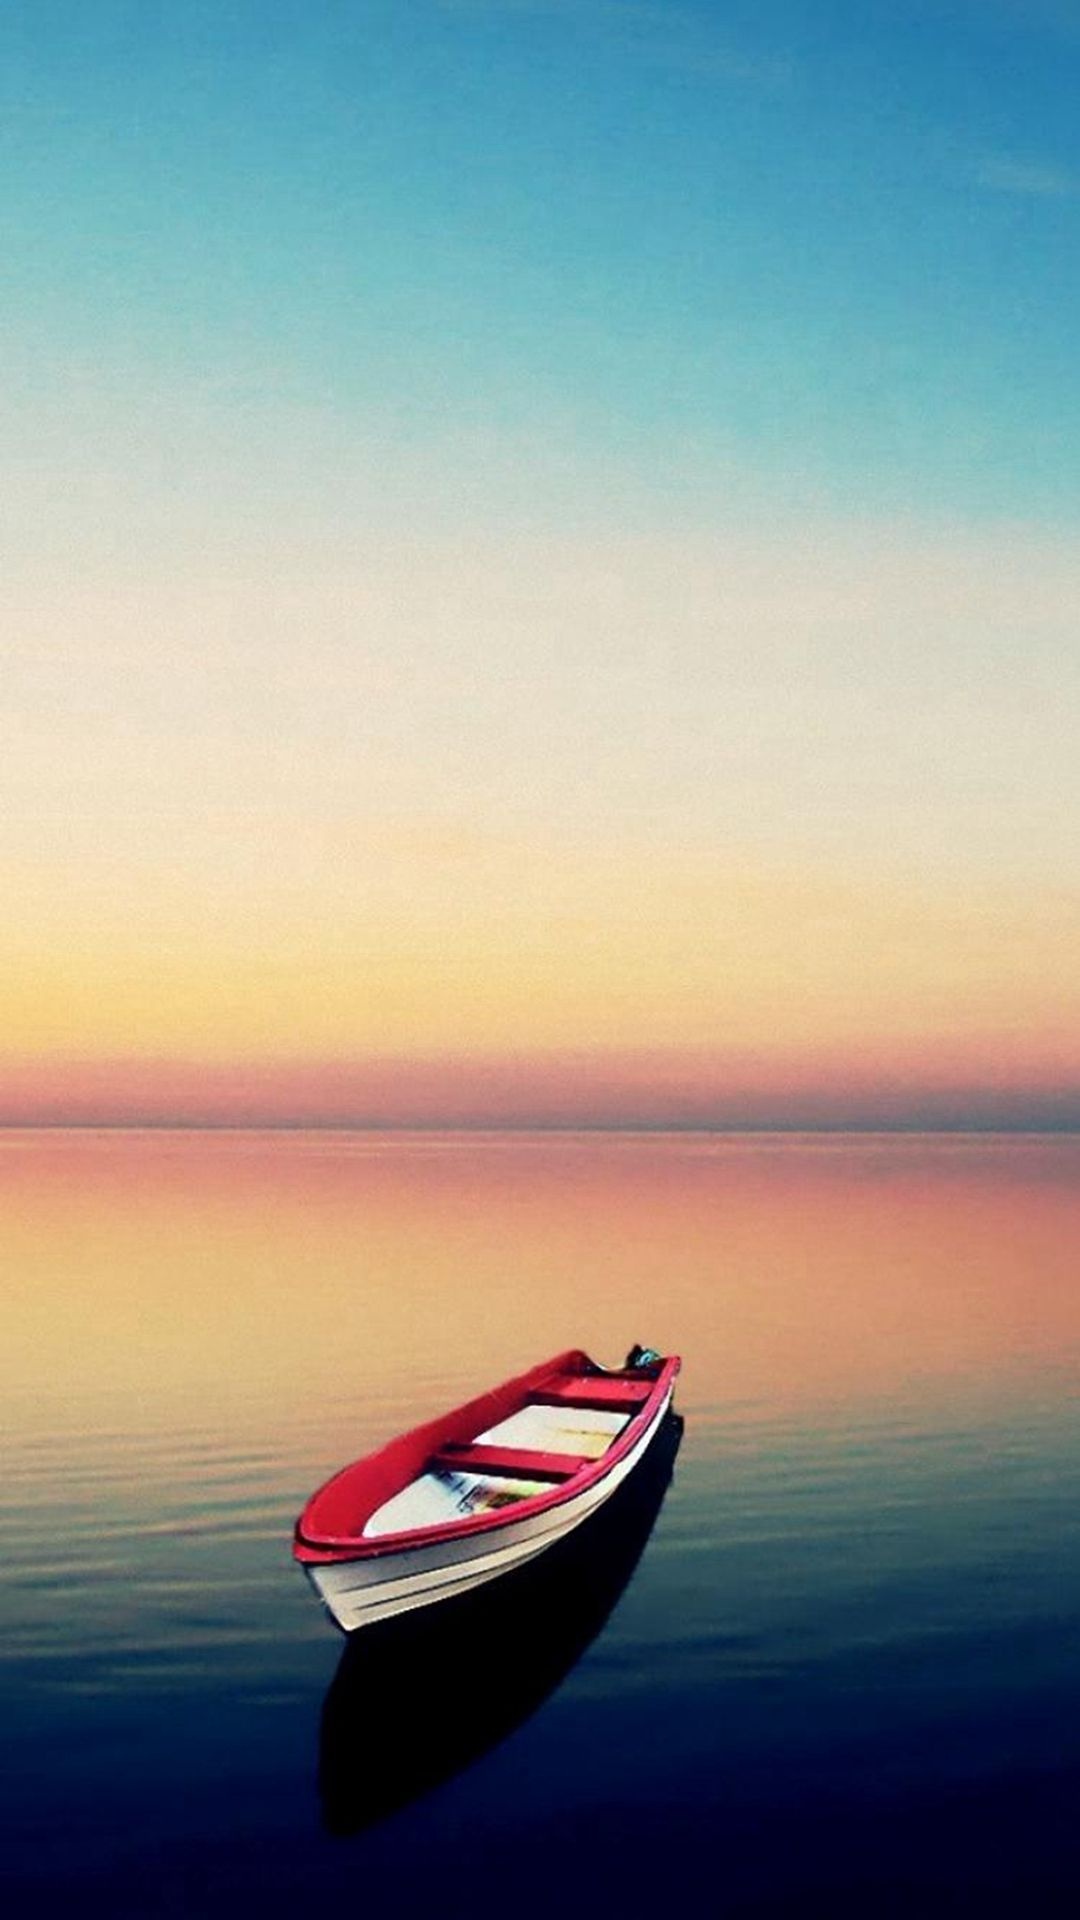 Boat: Lake, An open flat-bottomed boat used in shallow waters. 1080x1920 Full HD Background.